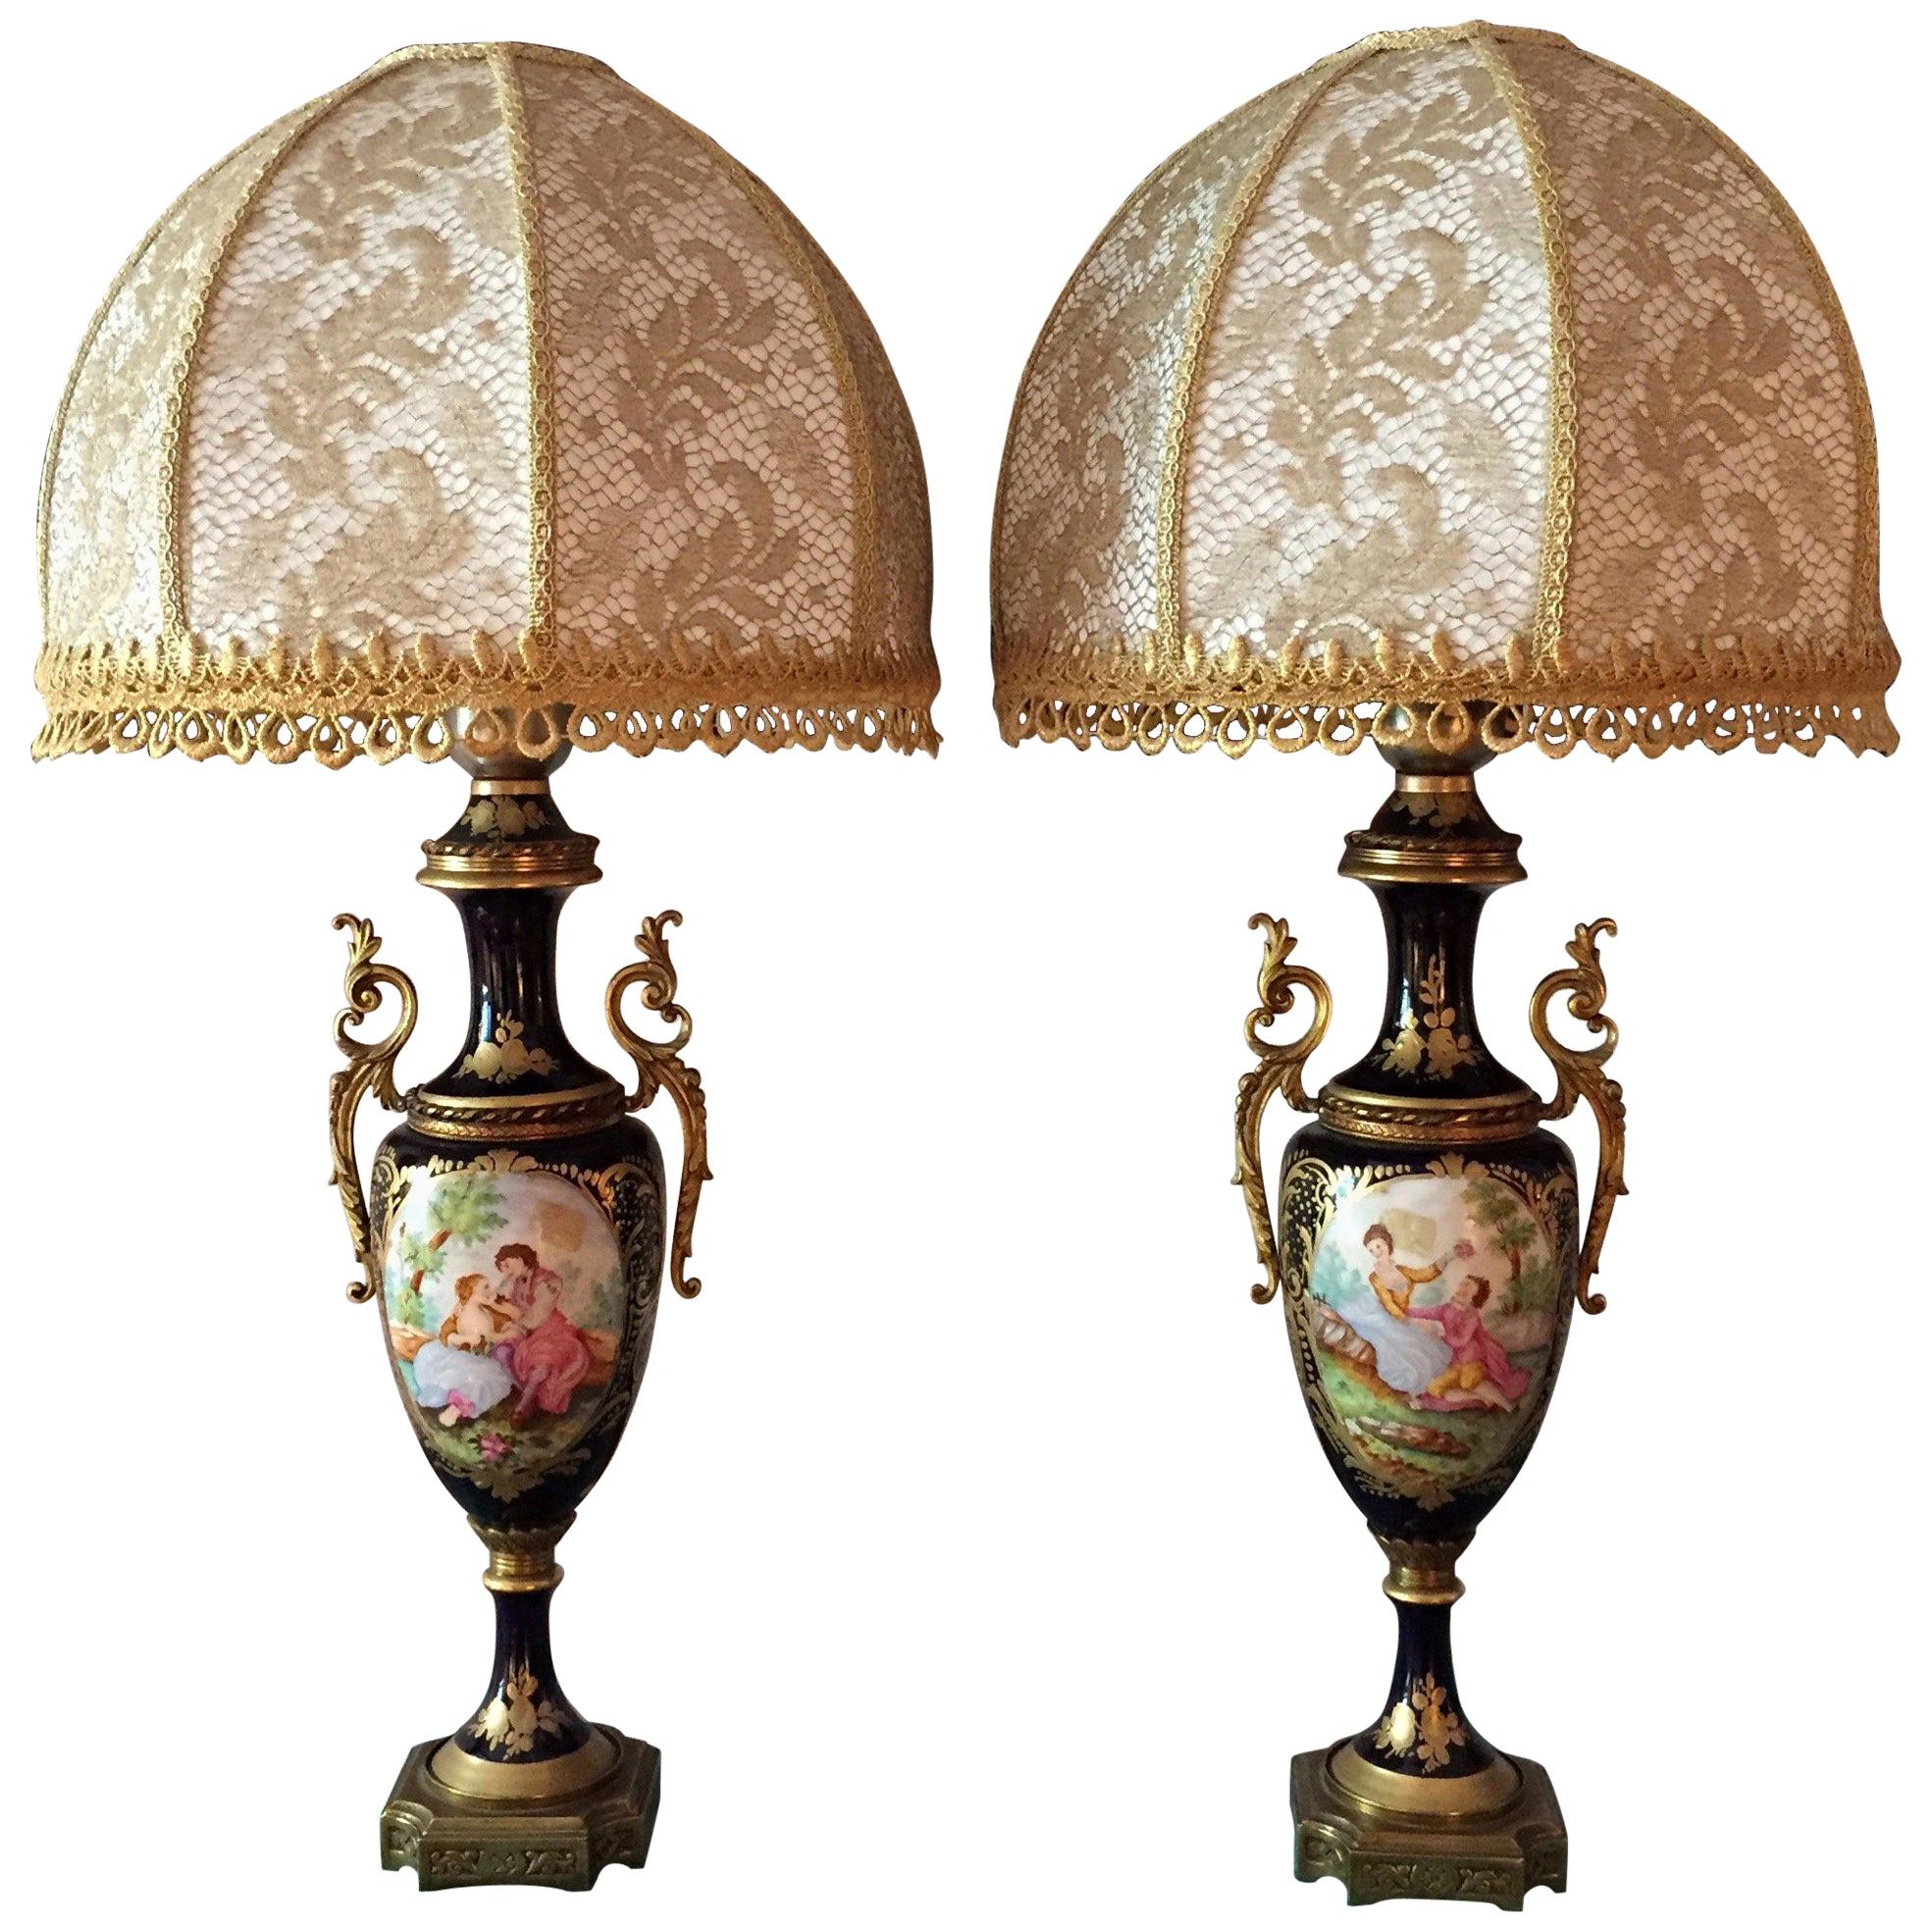 Pair of Italian Table Lamps Sèvres Style Blue Porcelain with Gold Lace Shades